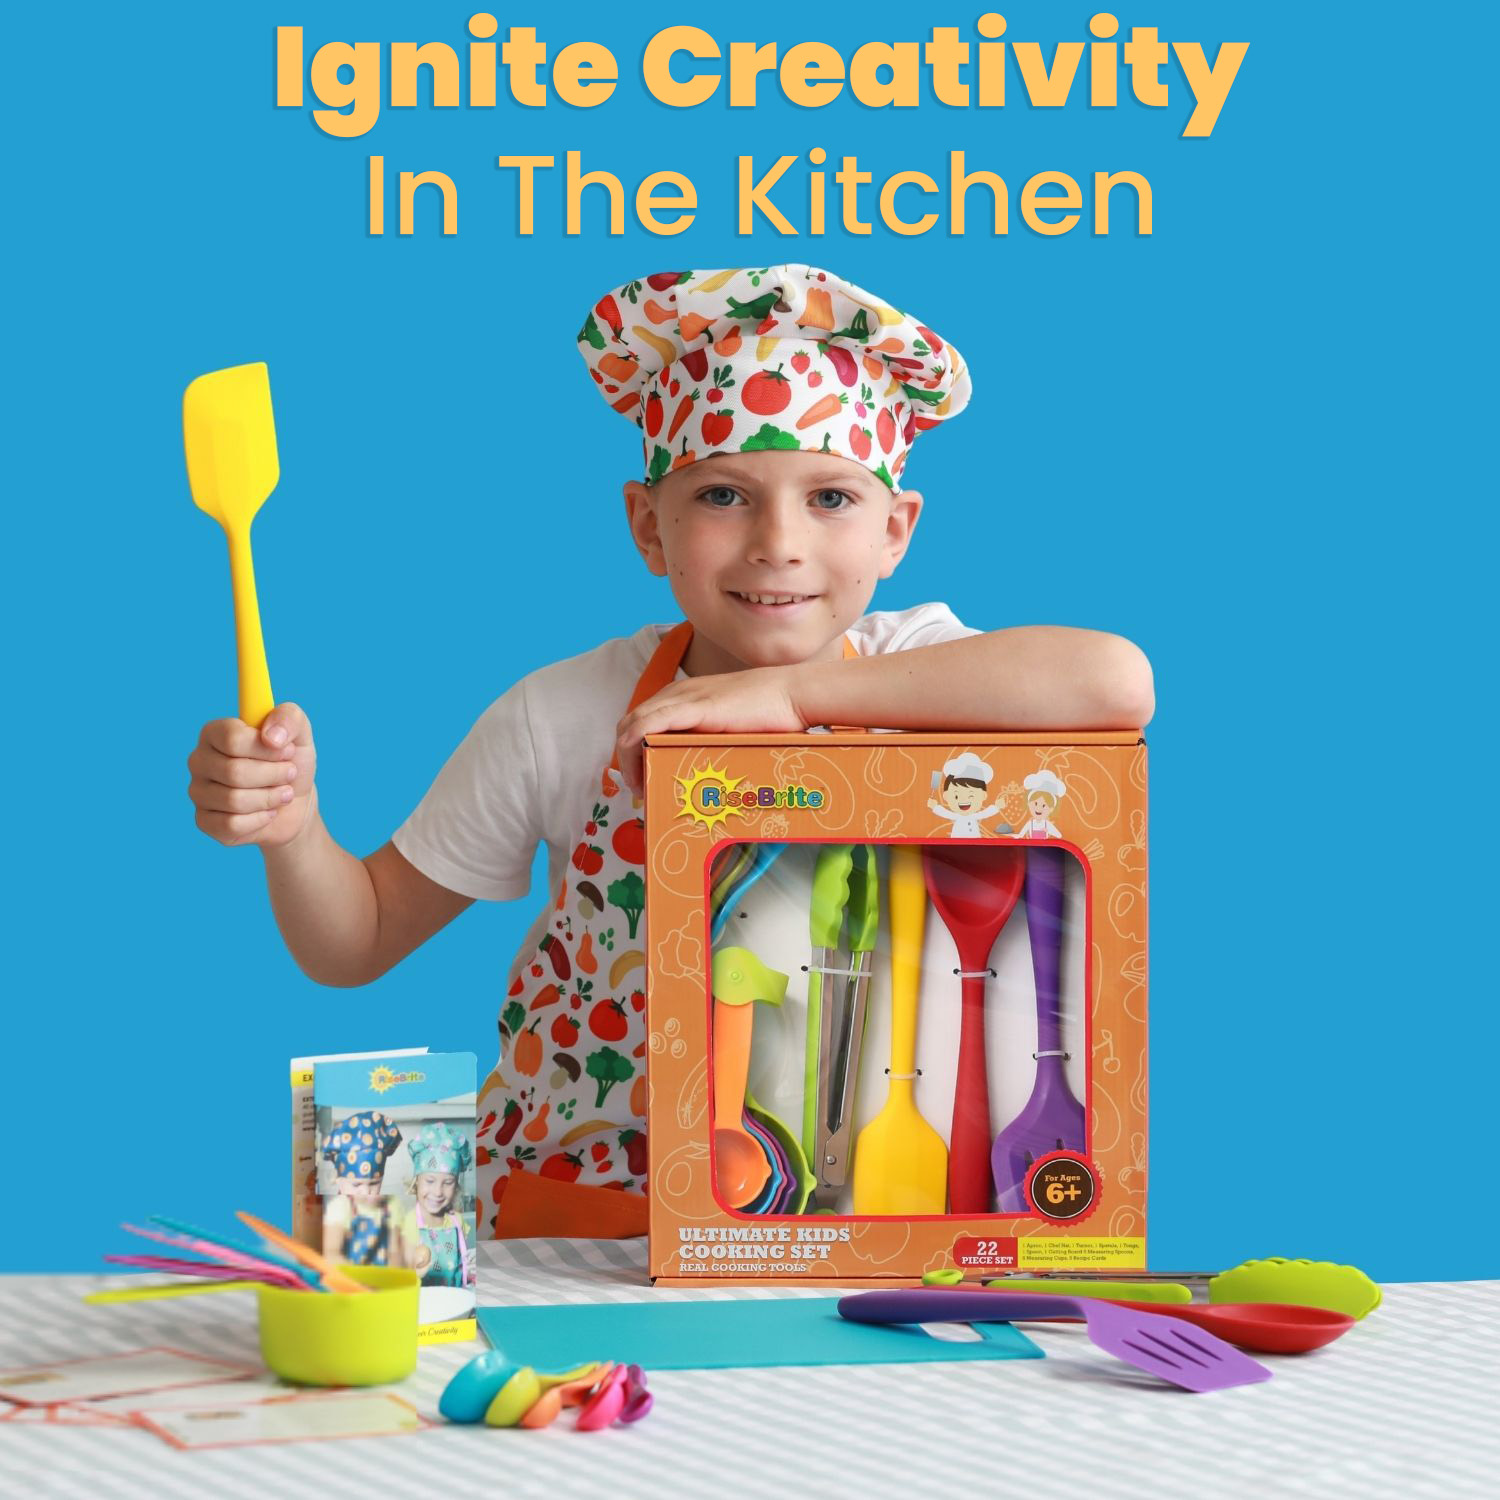 RiseBrite Real Kids Cooking Set With Vegetable Apron - Ignite Creativity In The Kitchen!